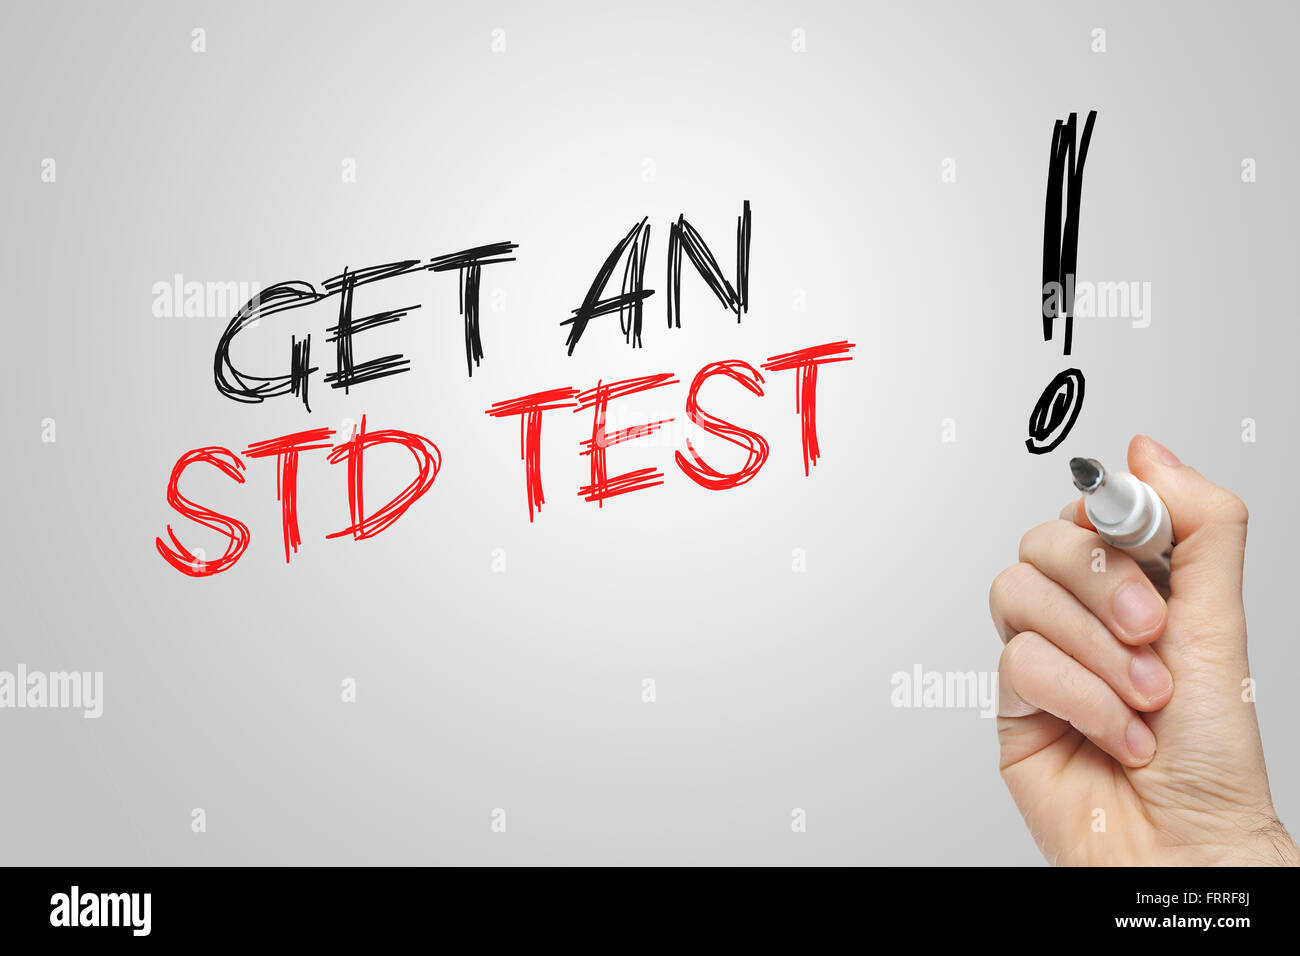 Hand writing get an std test on grey background Stock Photo